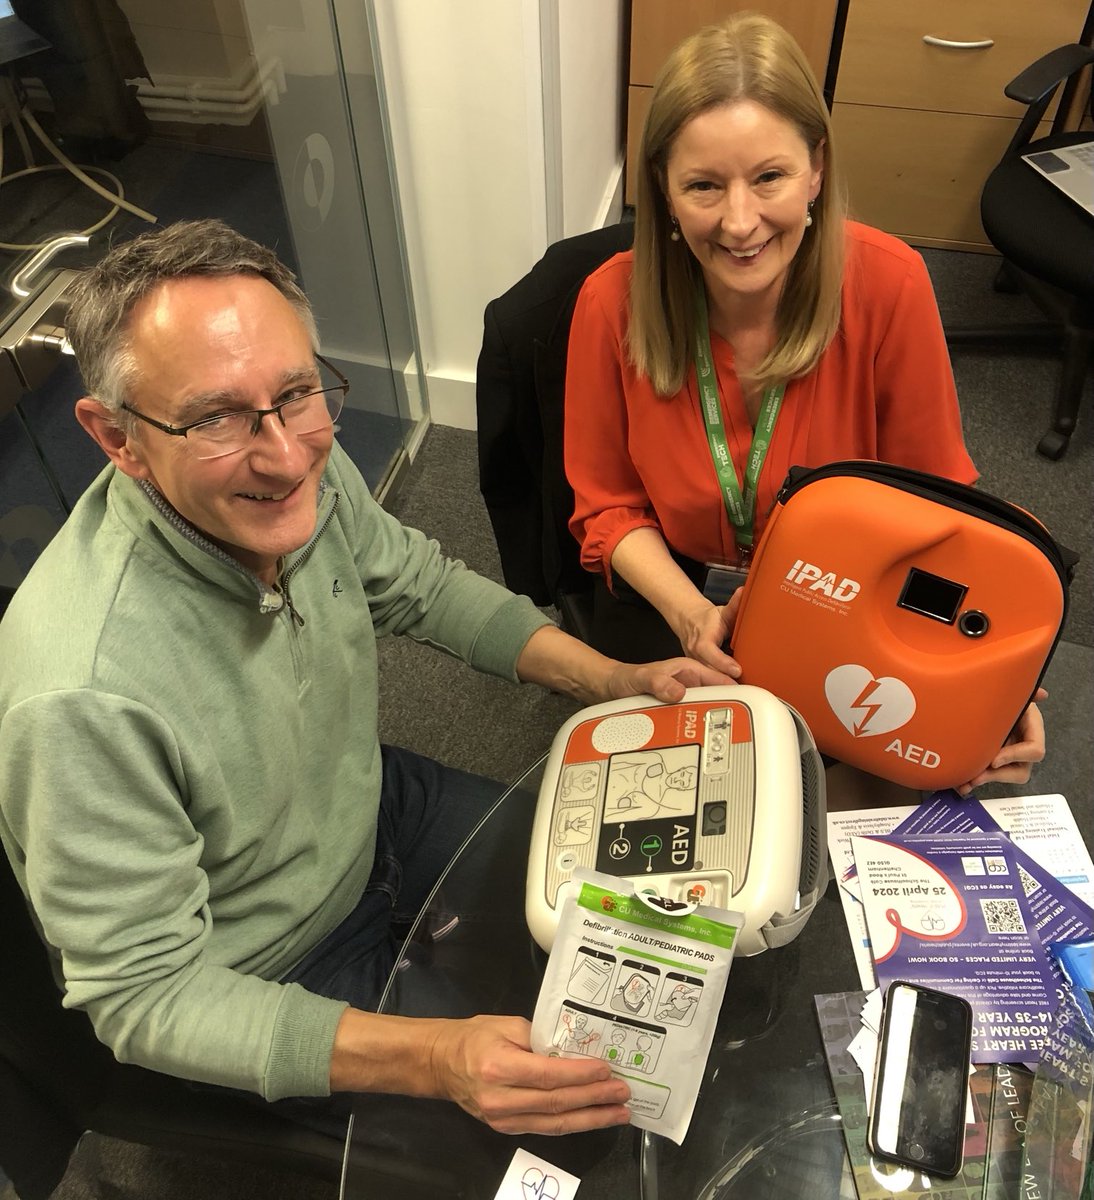 Public Hearts ♥️ on Valentine’s Day! @CheltenhamBC⁩ just funded 9 new defibrillators for the town. Amazing Claire Seed of ⁦@TidalDirect⁩ & Public Hearts showed me today just how easy they are to use. Won’t even work if the person doesn’t need it! linktr.ee/publichearts